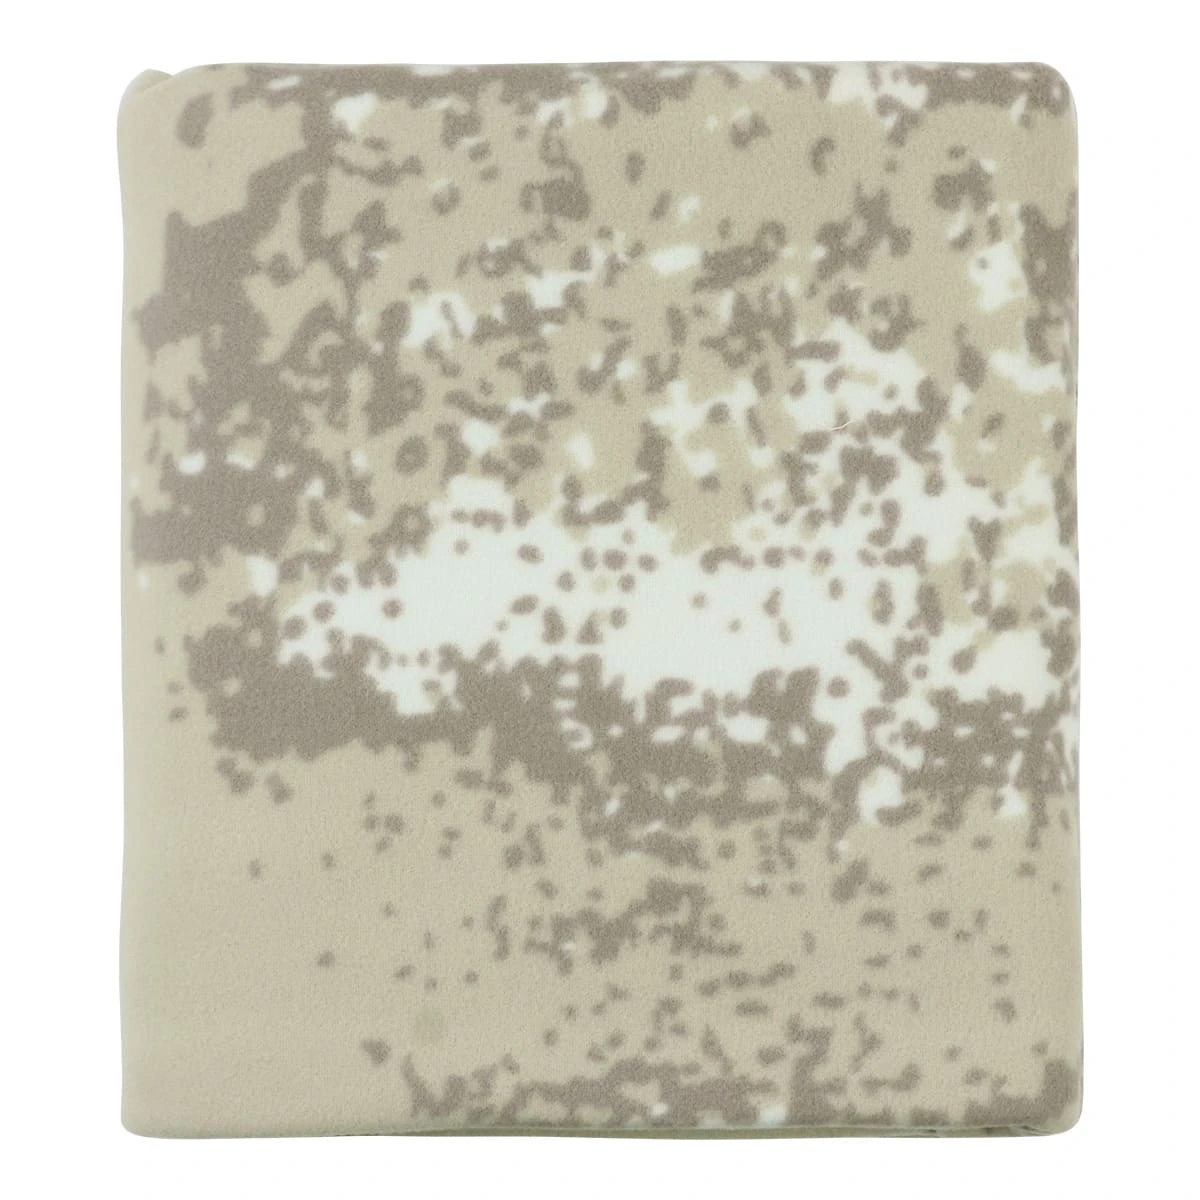 100% Recycled Polyester Bottles Printed Fleece Blanket - I Love Recycling (Beige)